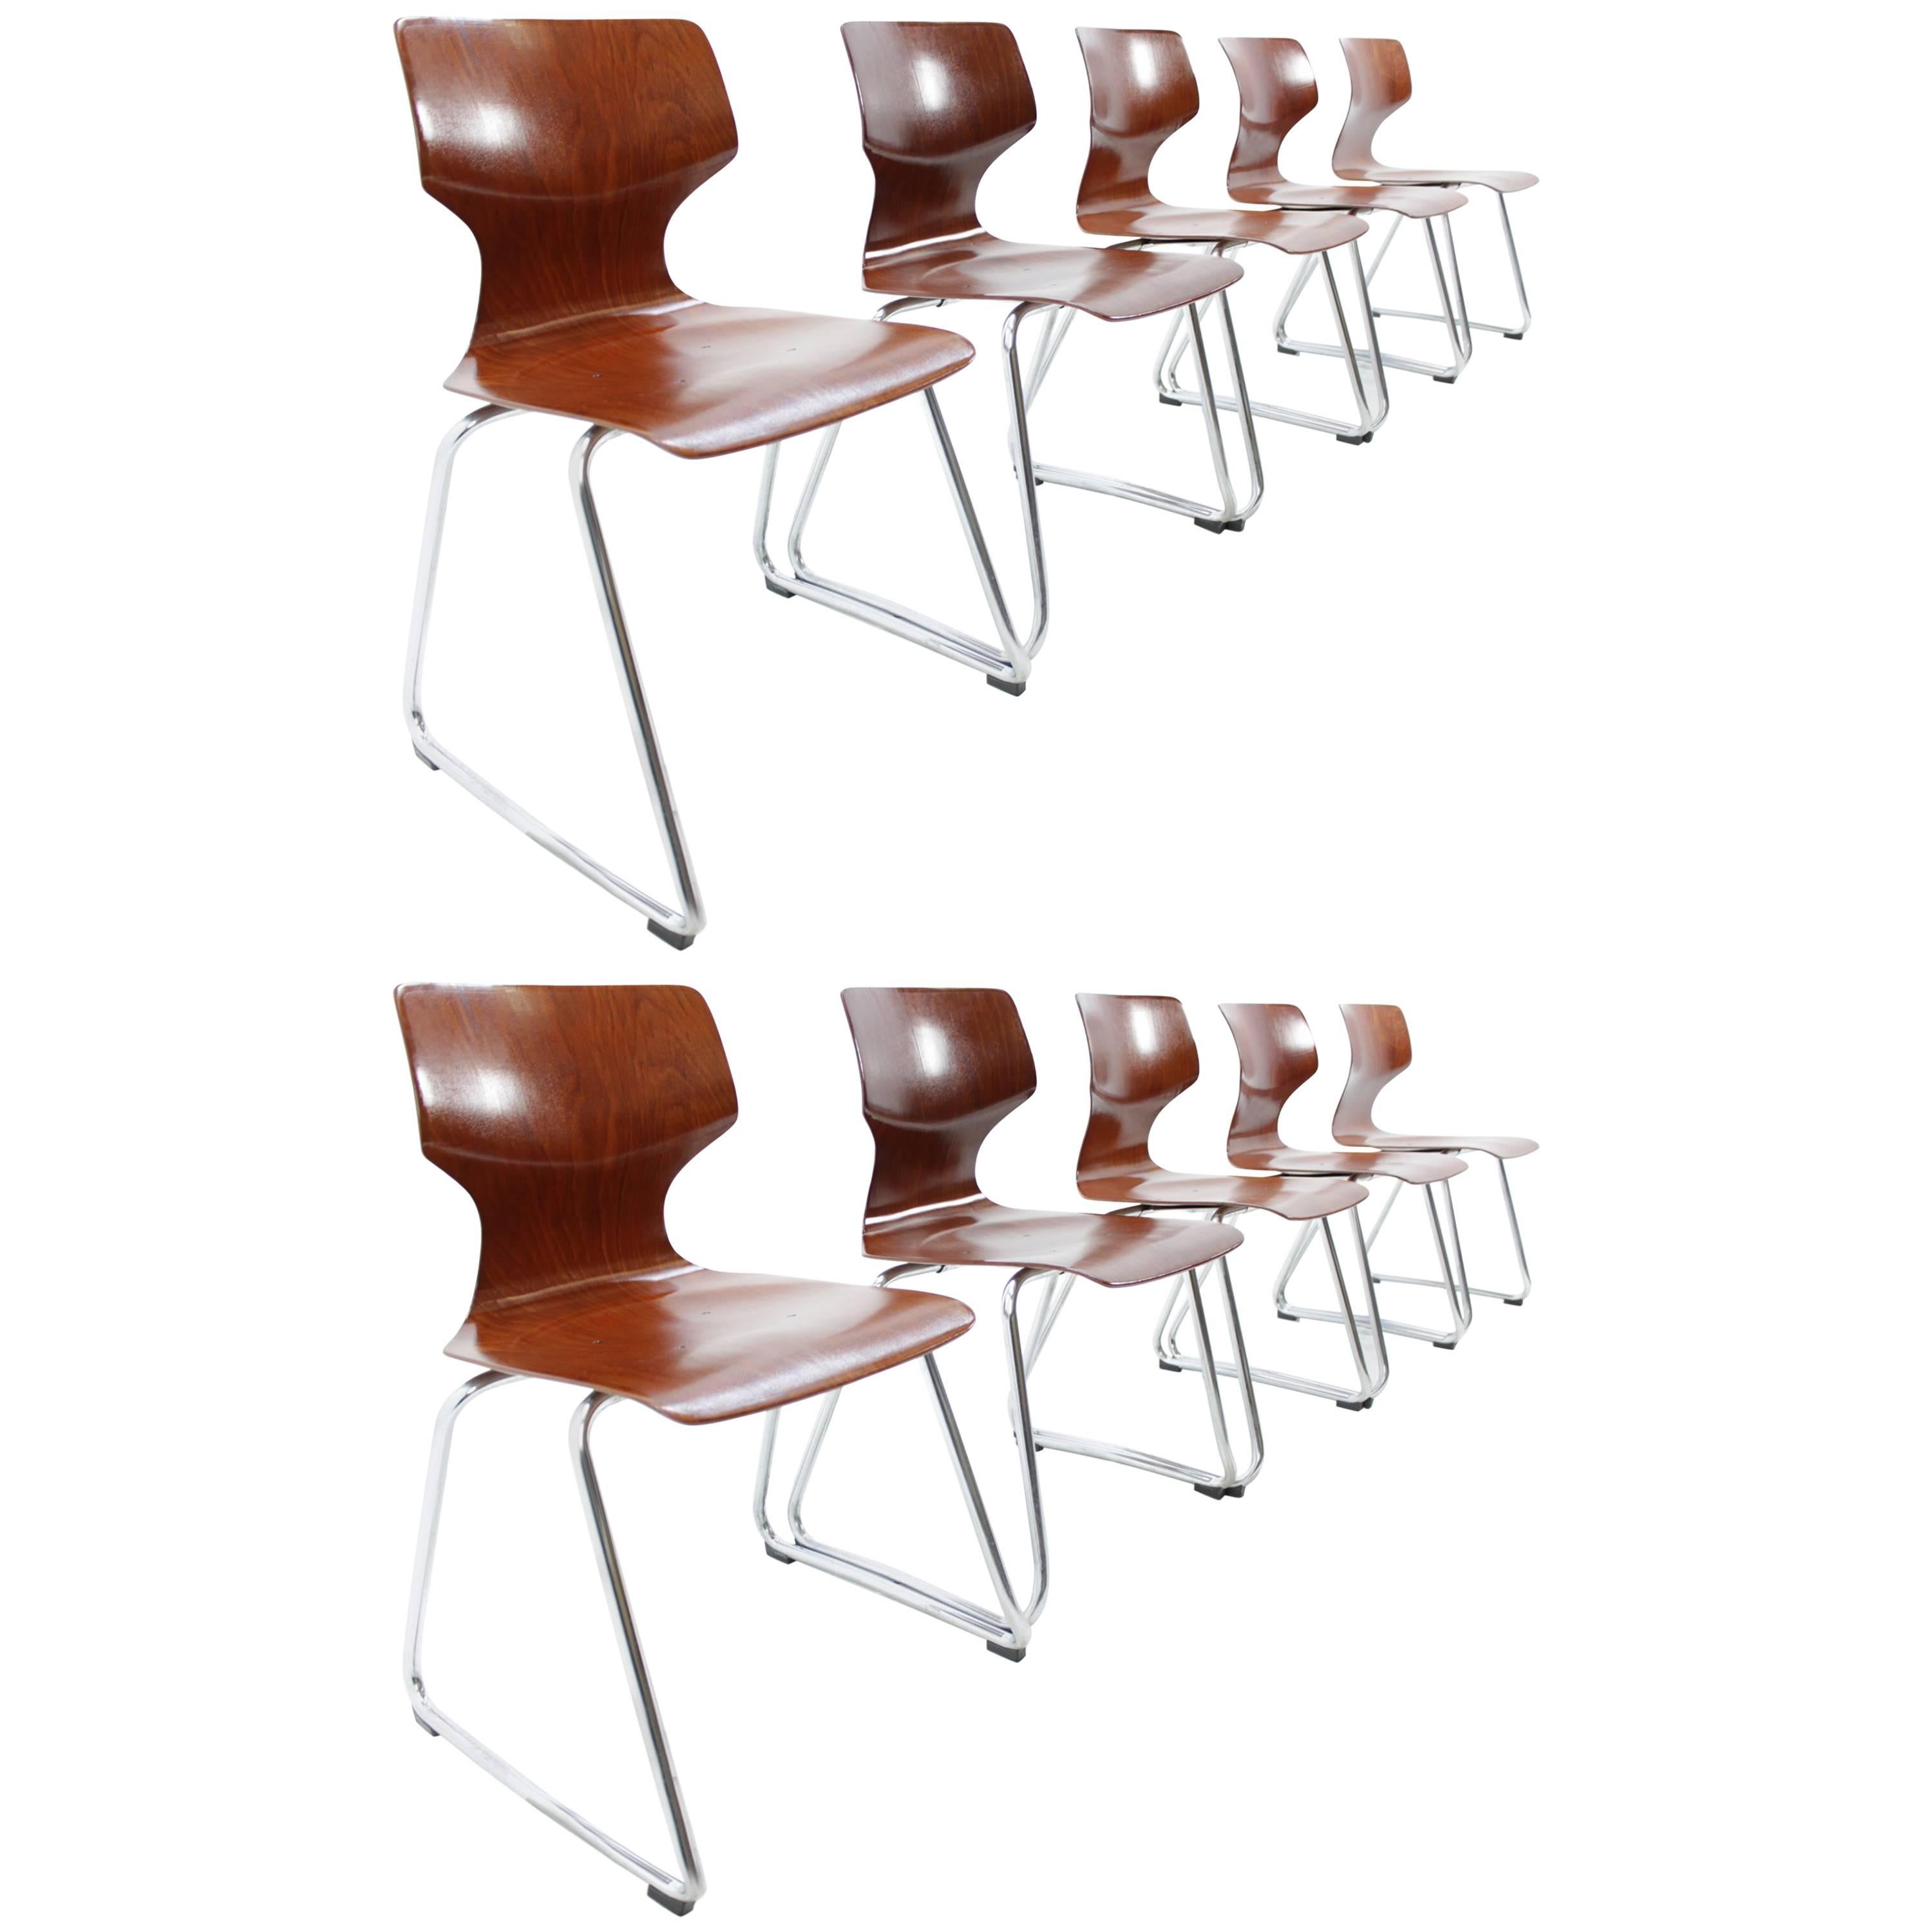 Set of Ten Design Dining Chairs, Flötotto